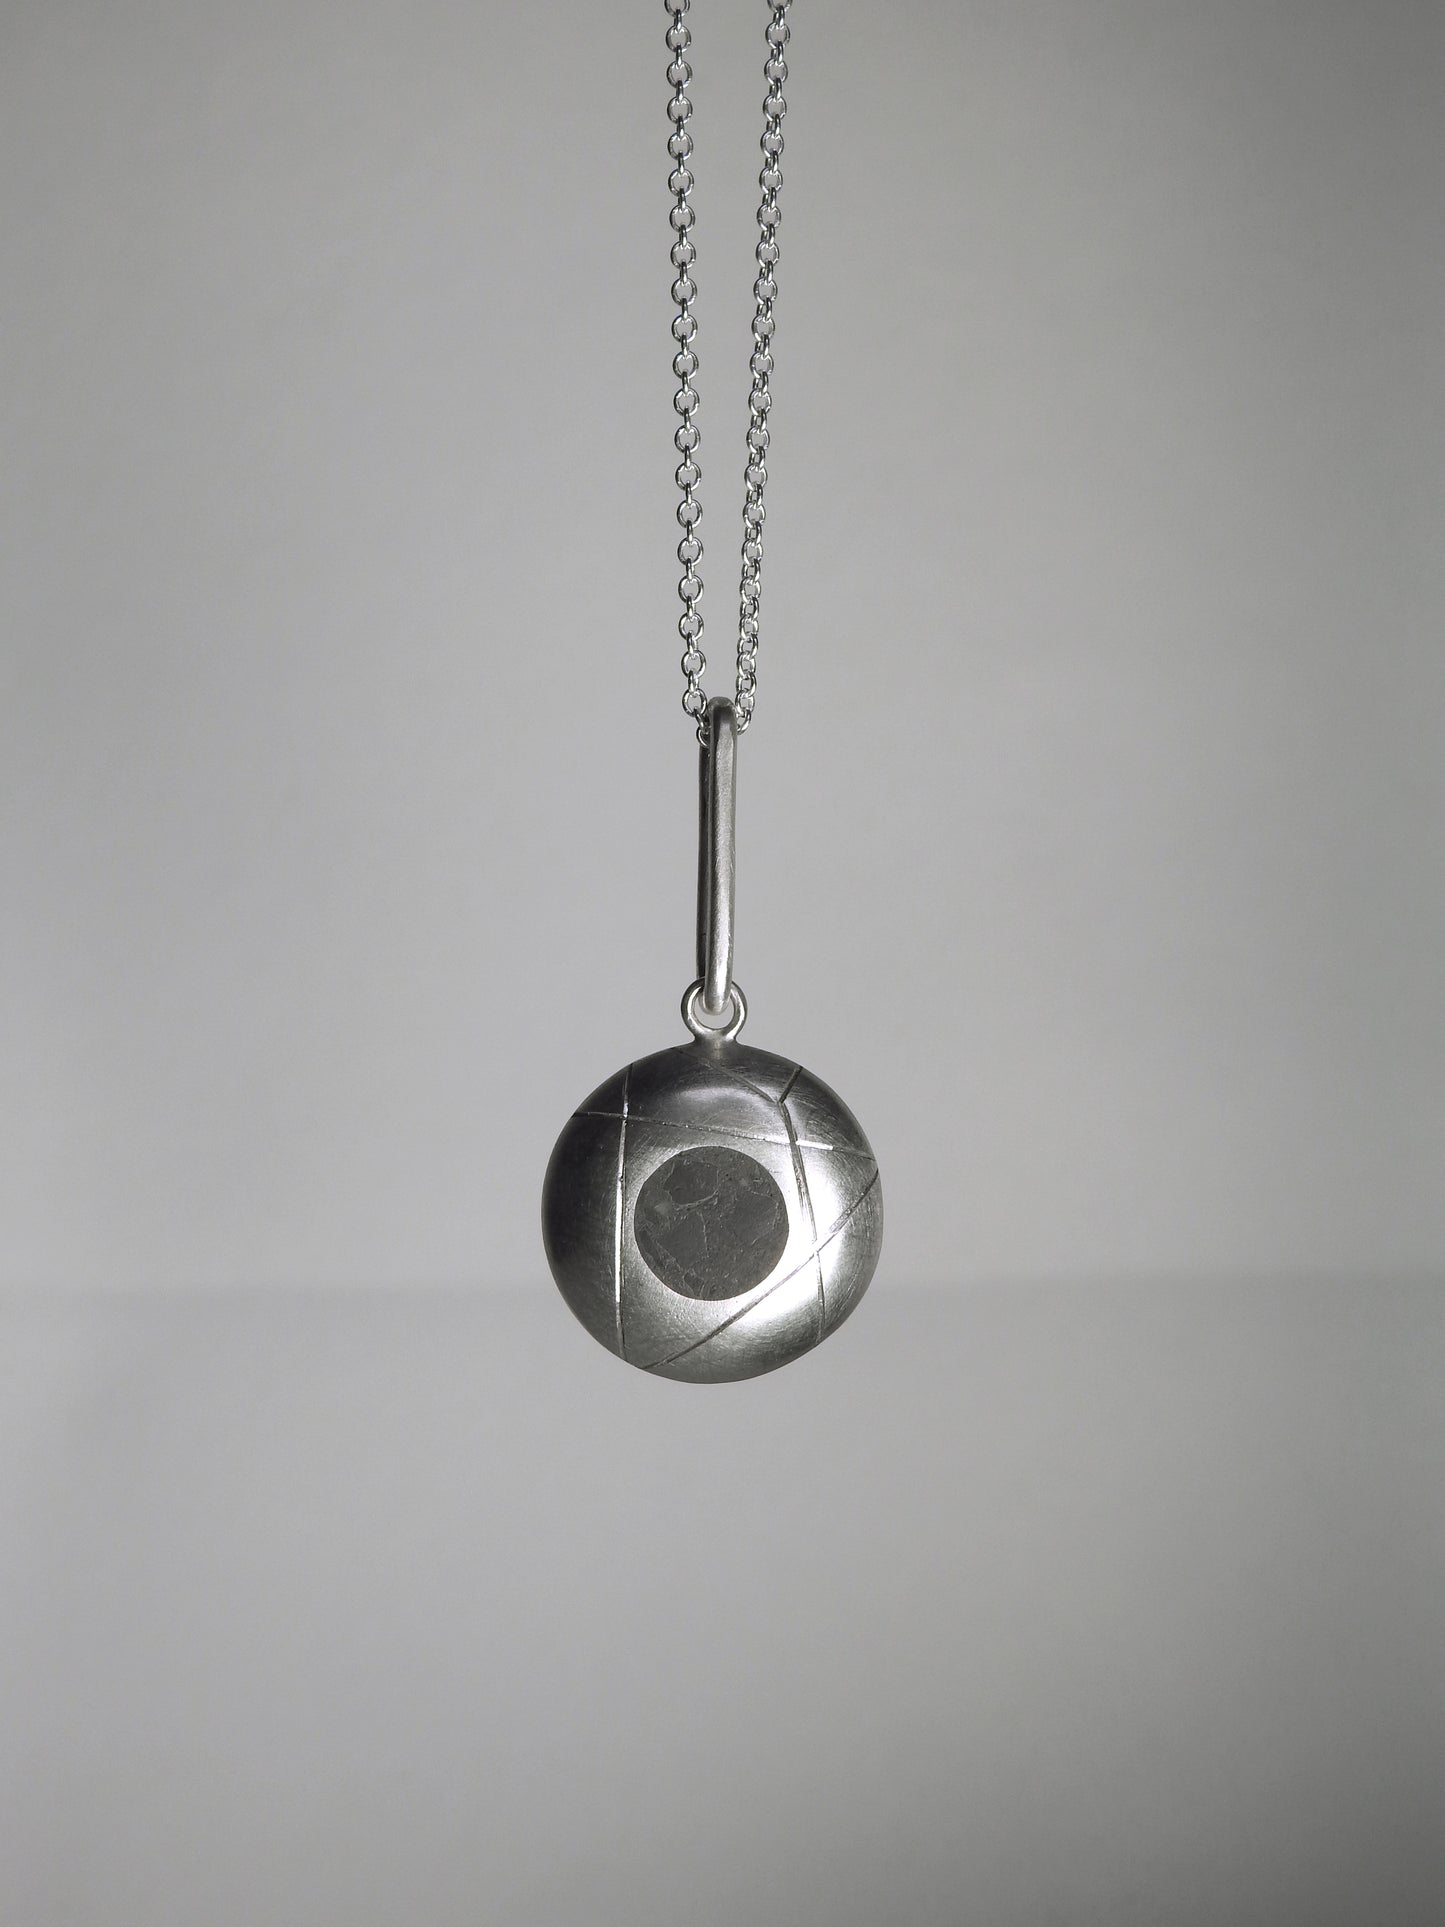 Pendulum style pendant, half dome with limestone inlay, with accent carved lines hanging on elongated bale, matte and high-polish accent finishes, on 18" rounded box link chain, by ZEALmetal, Nicole Horlor, in Kingston, ON, Canada